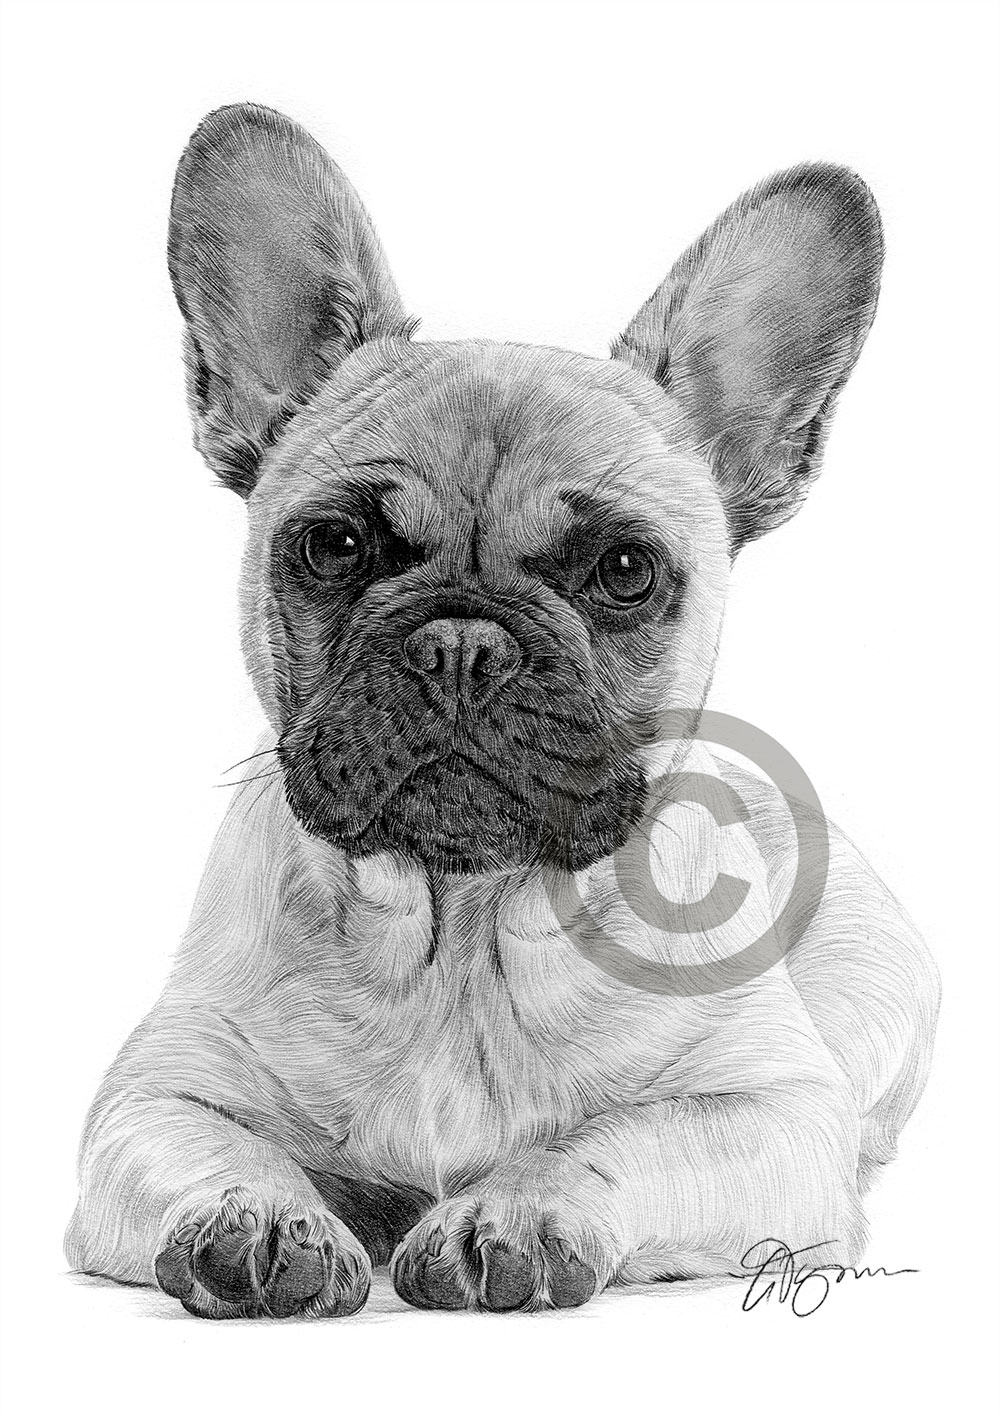 Pencil drawing of a young French Bulldog by artist Gary Tymon